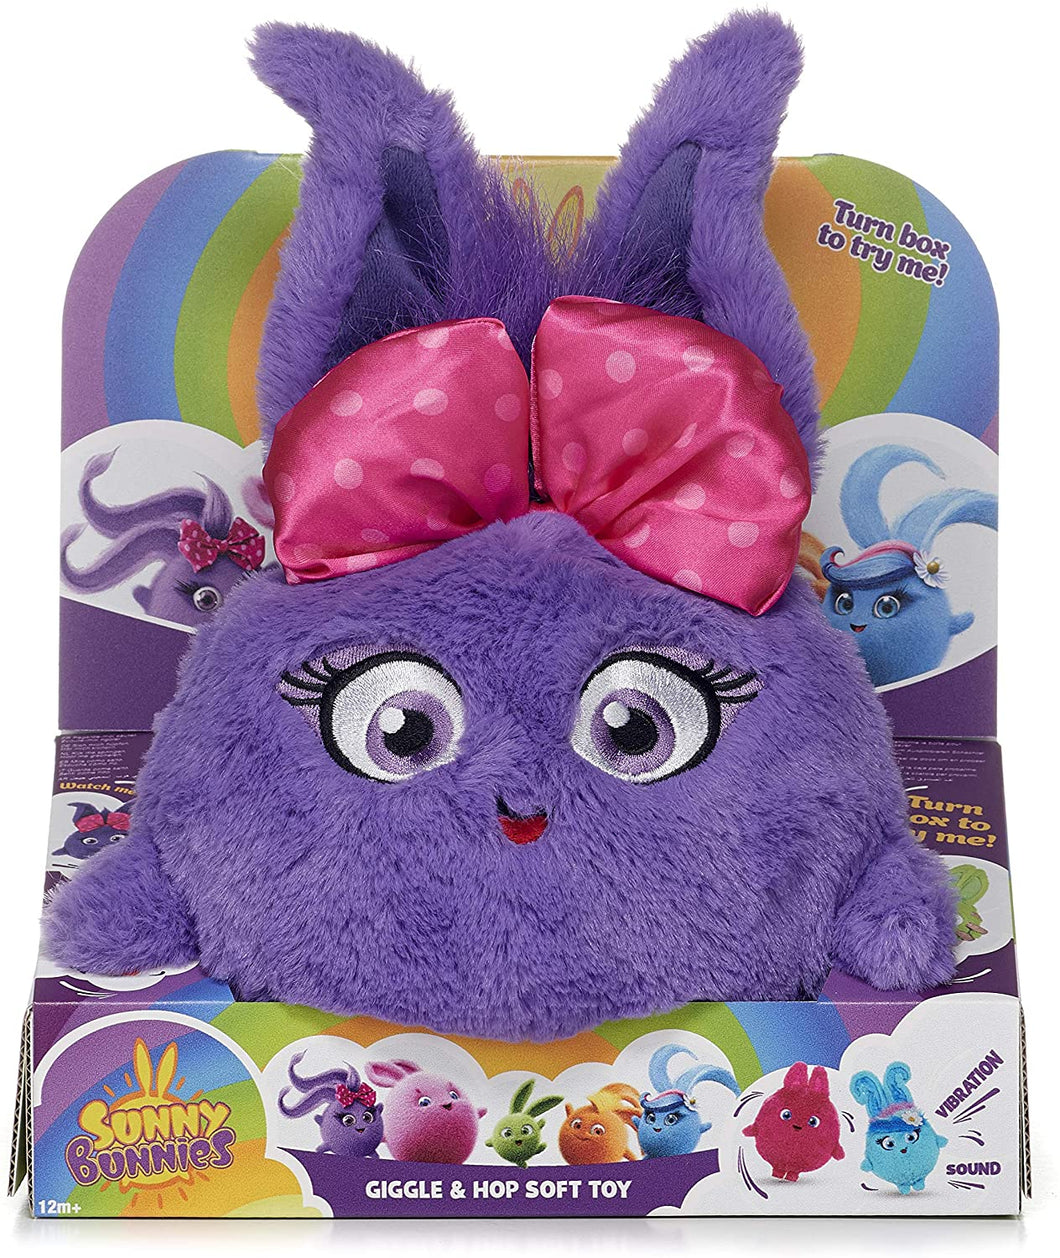 Posh Paws 37427 Sunny Bunnies Large Feature Iris Giggle & Hop Soft Toy-29cm (11 inch)